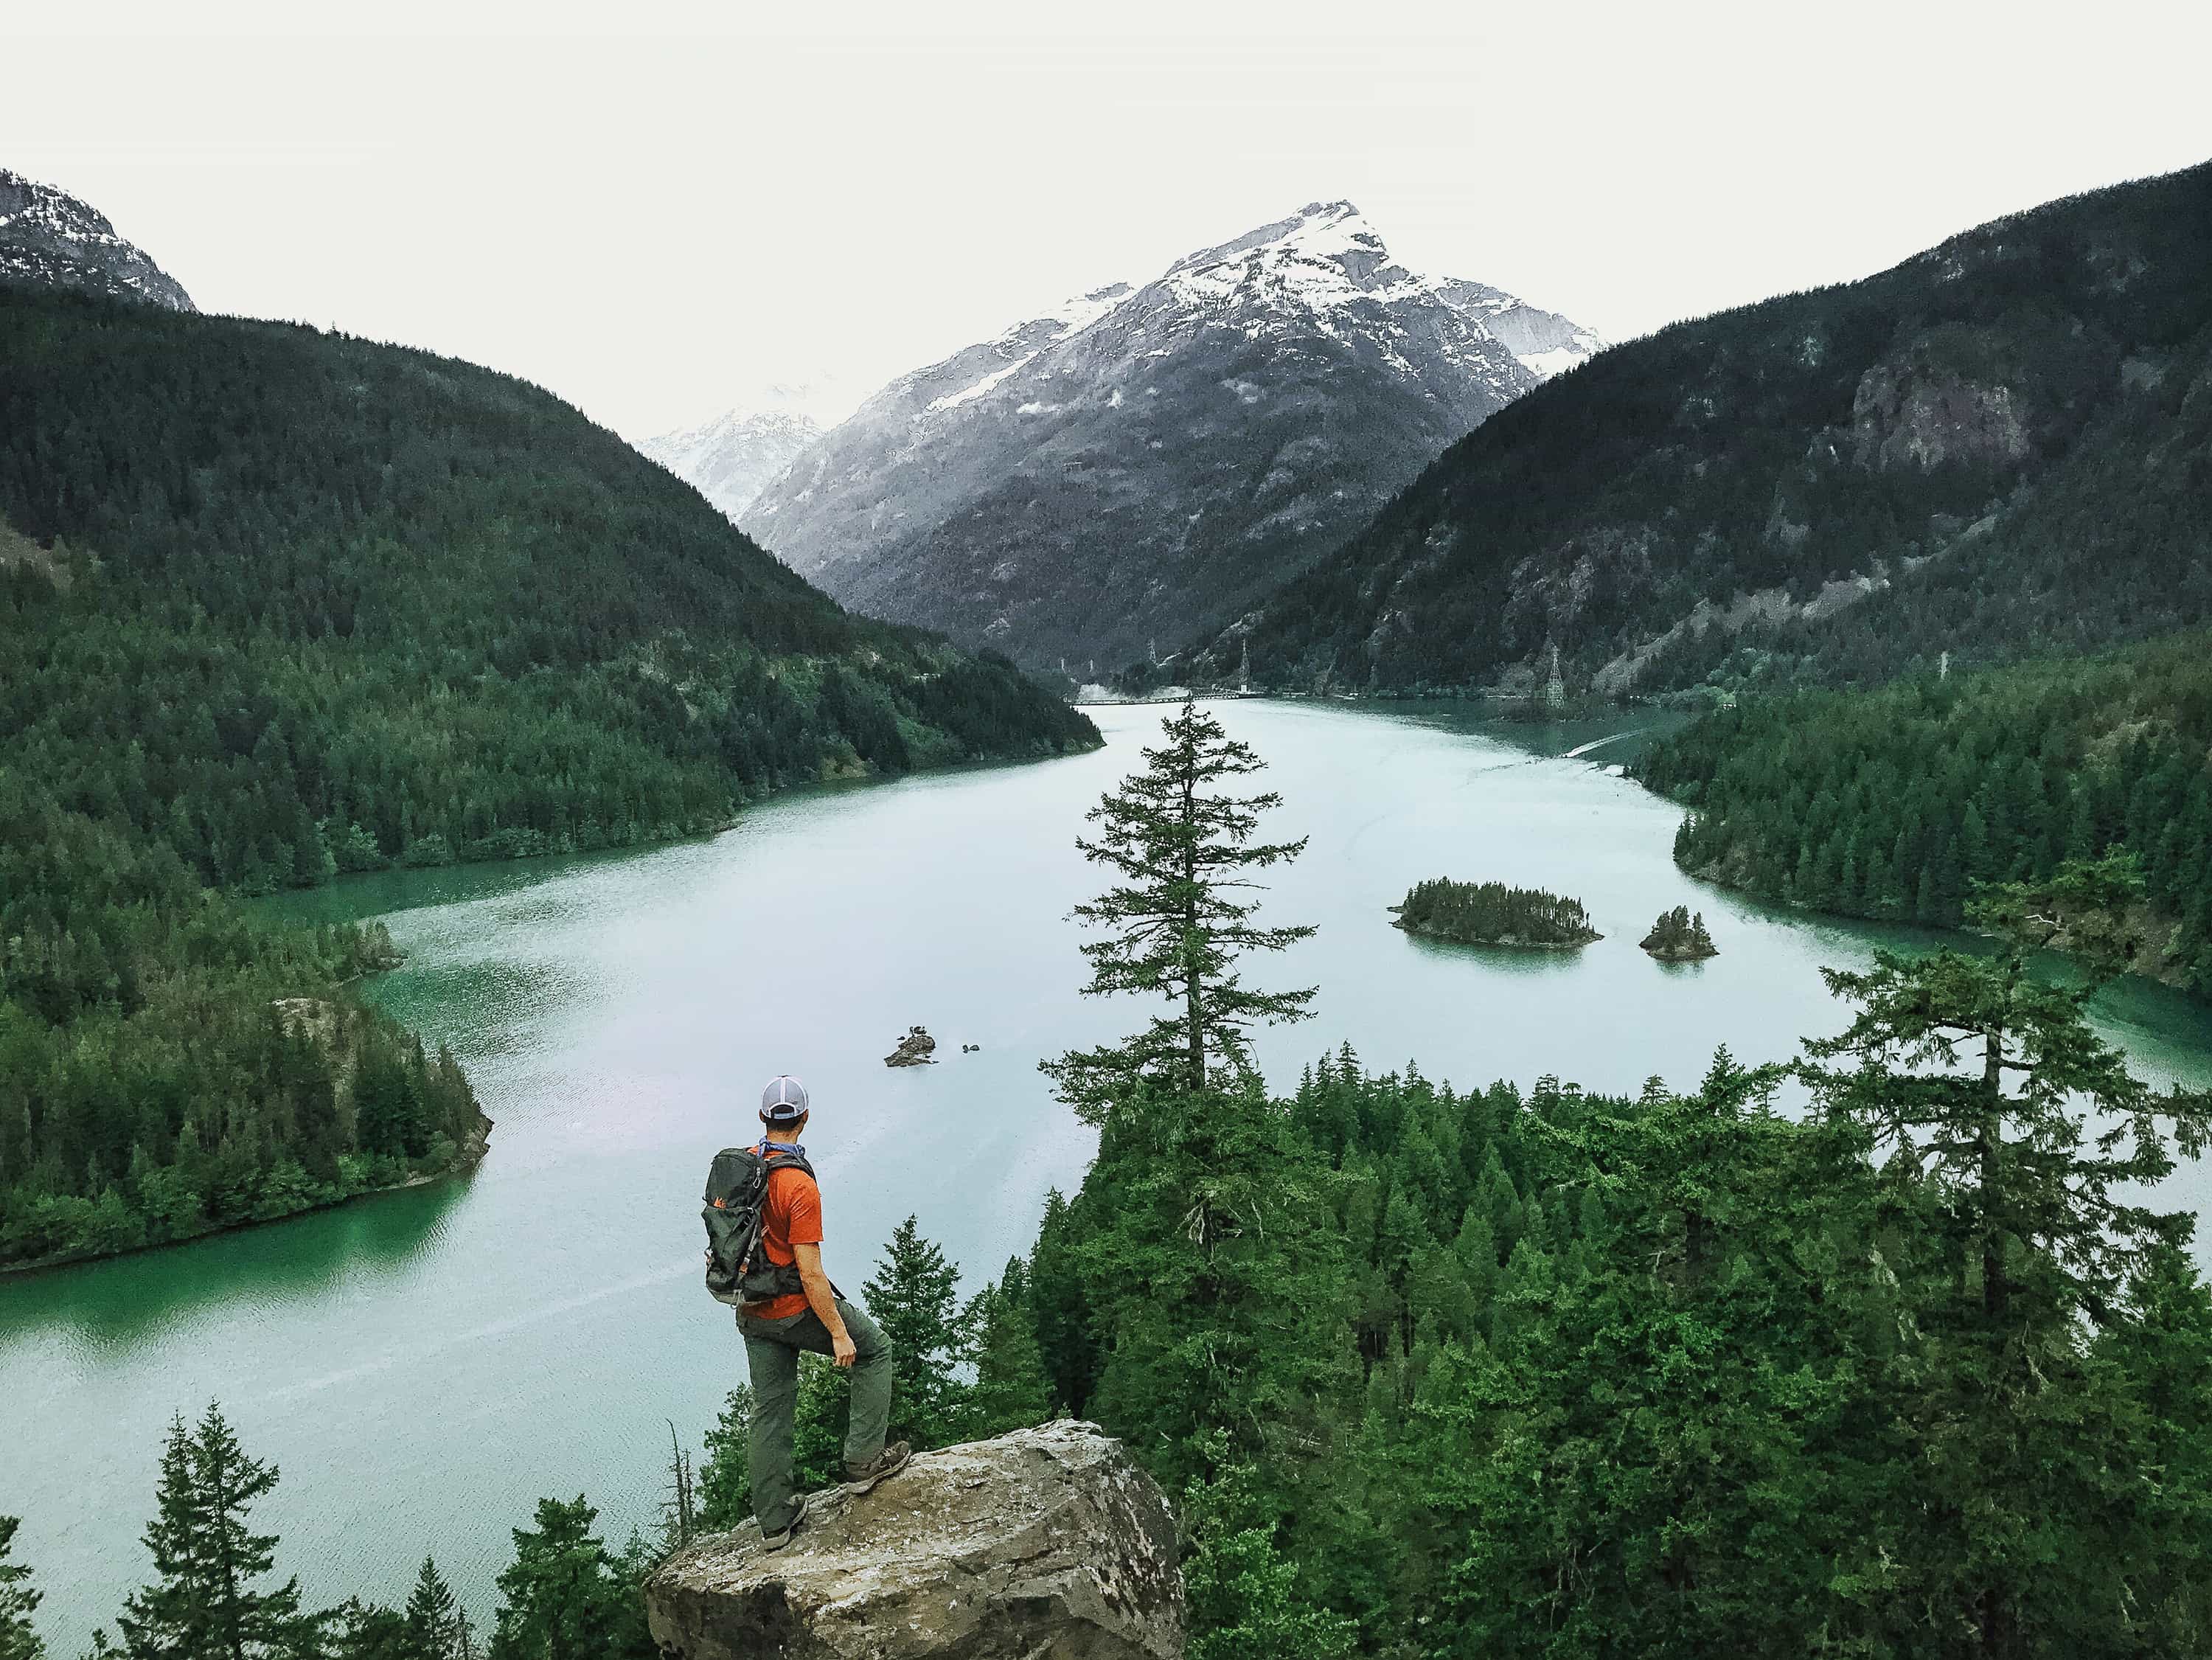 Diablo Lake in North Cascades National Park shot by Kevin Lu on iPhone 7 Plus.